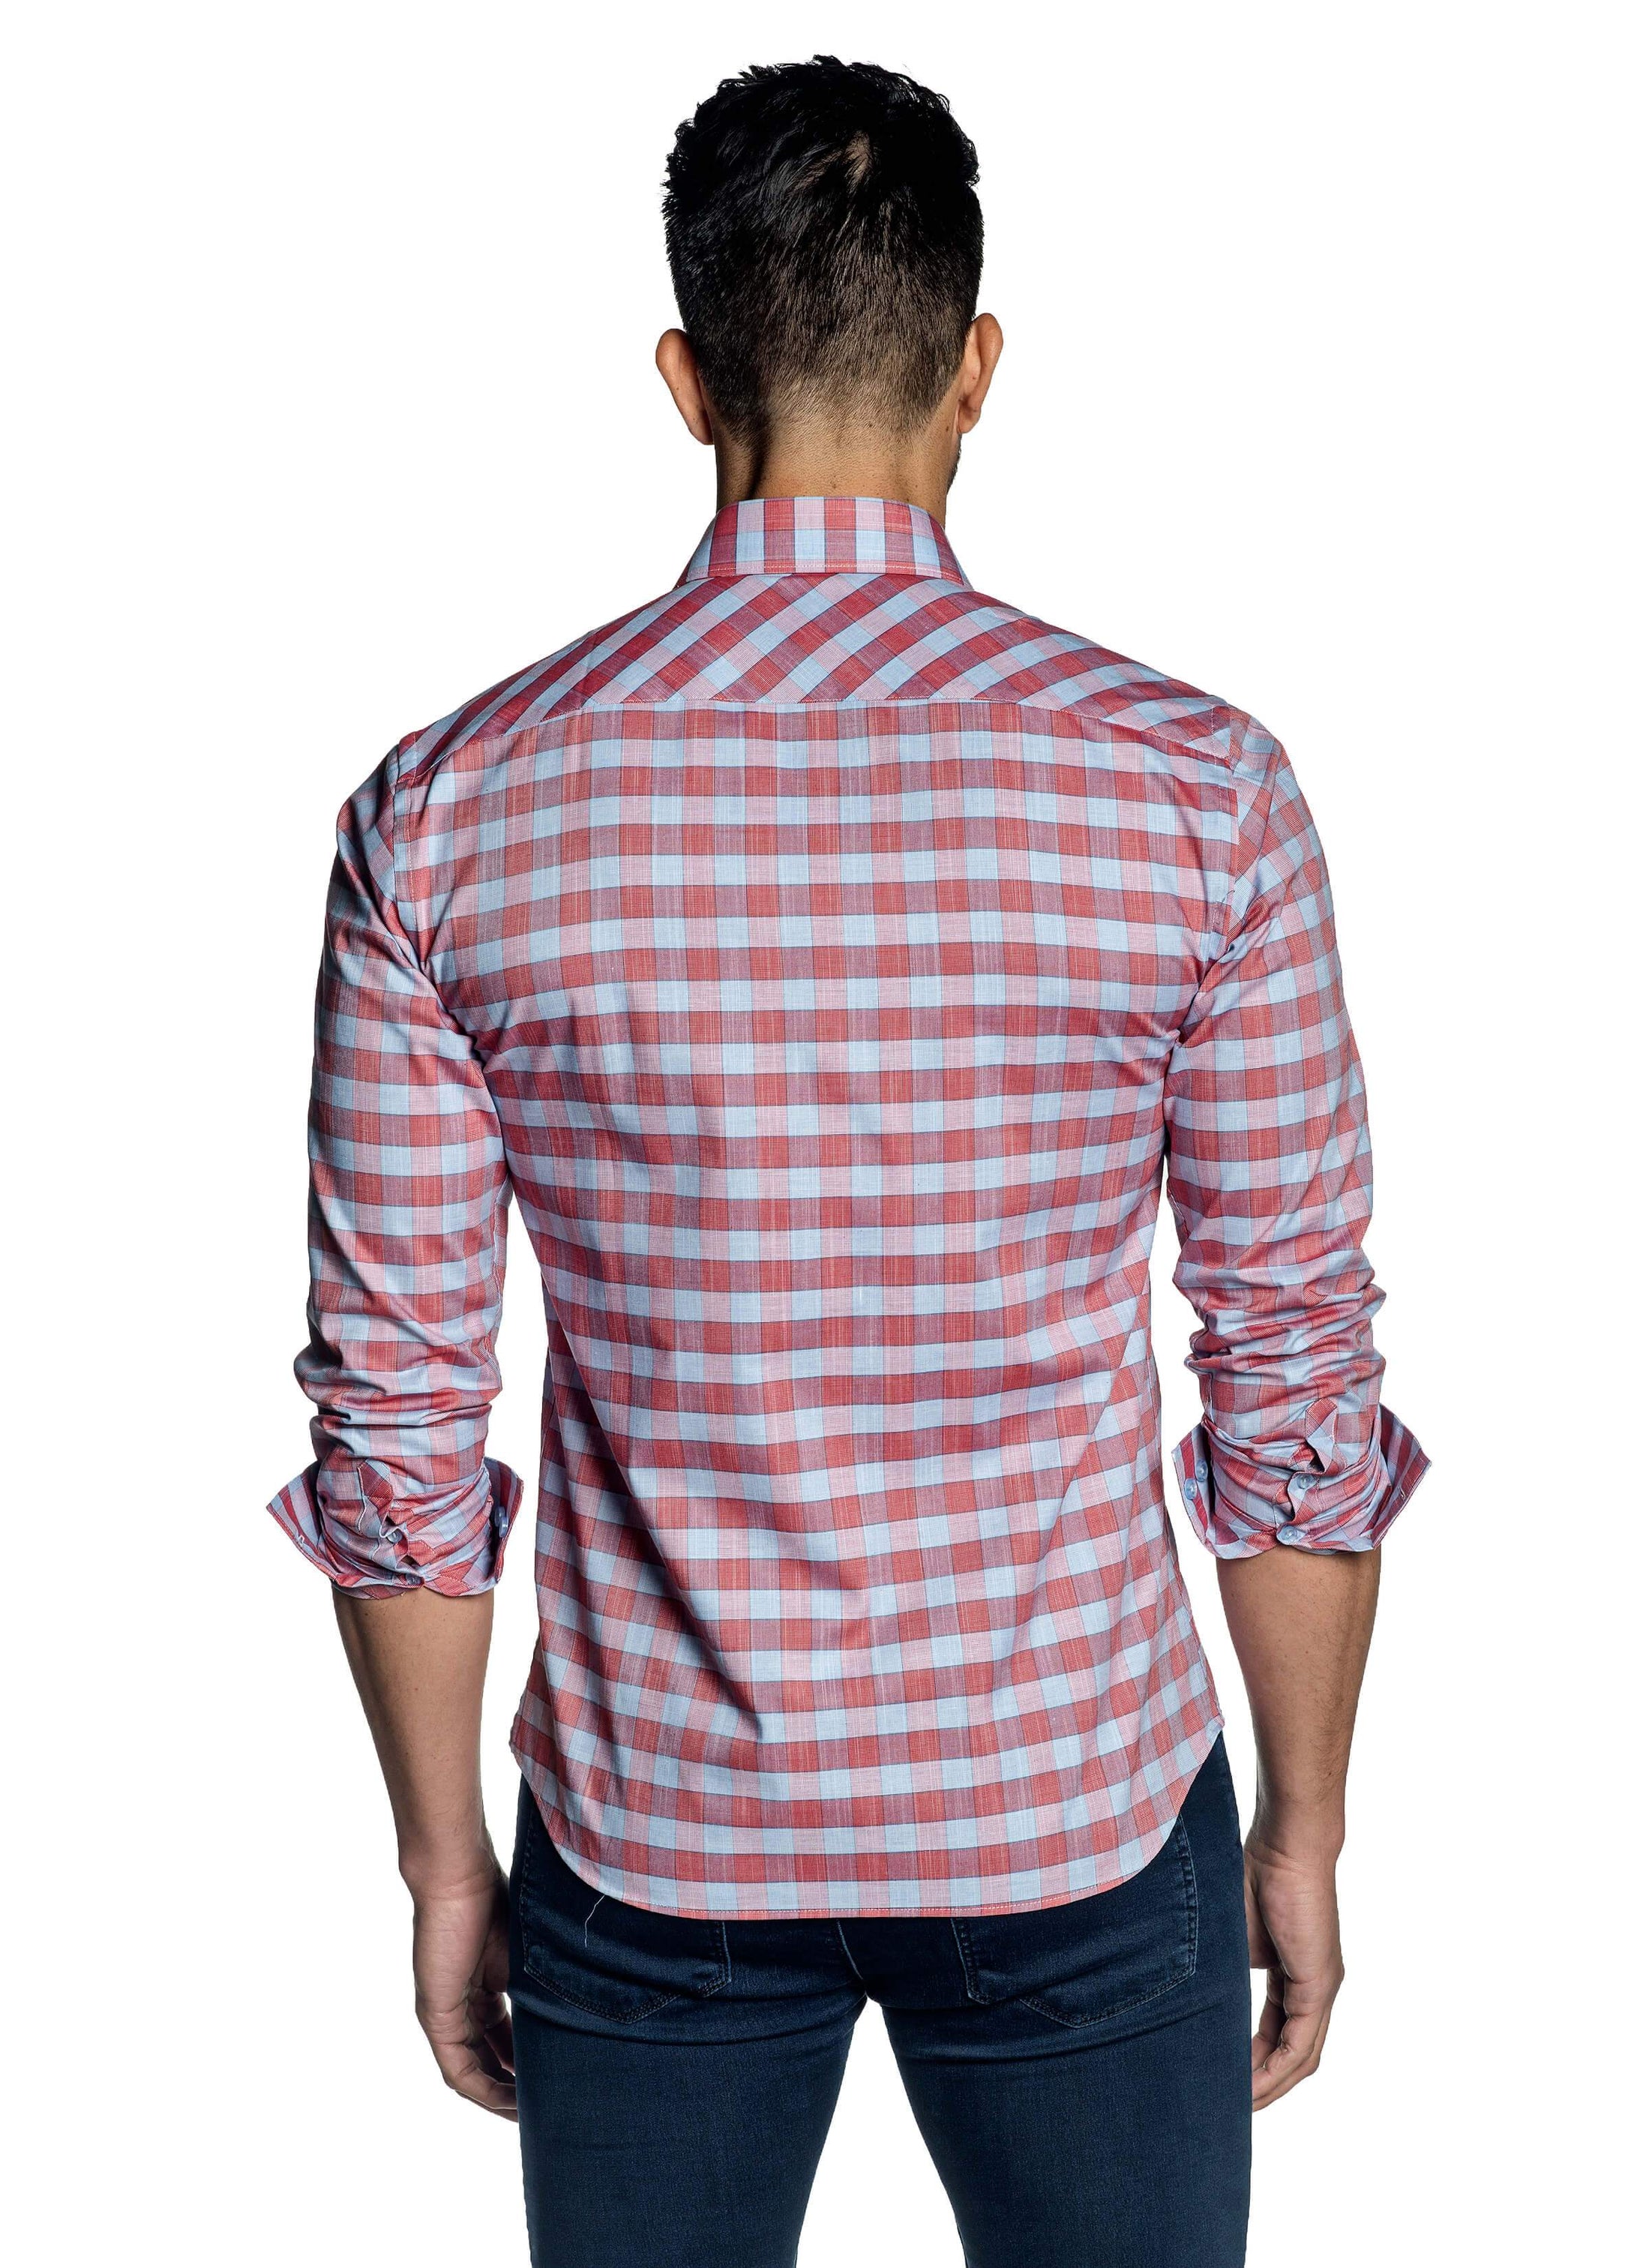 red checkered shirt outfit men